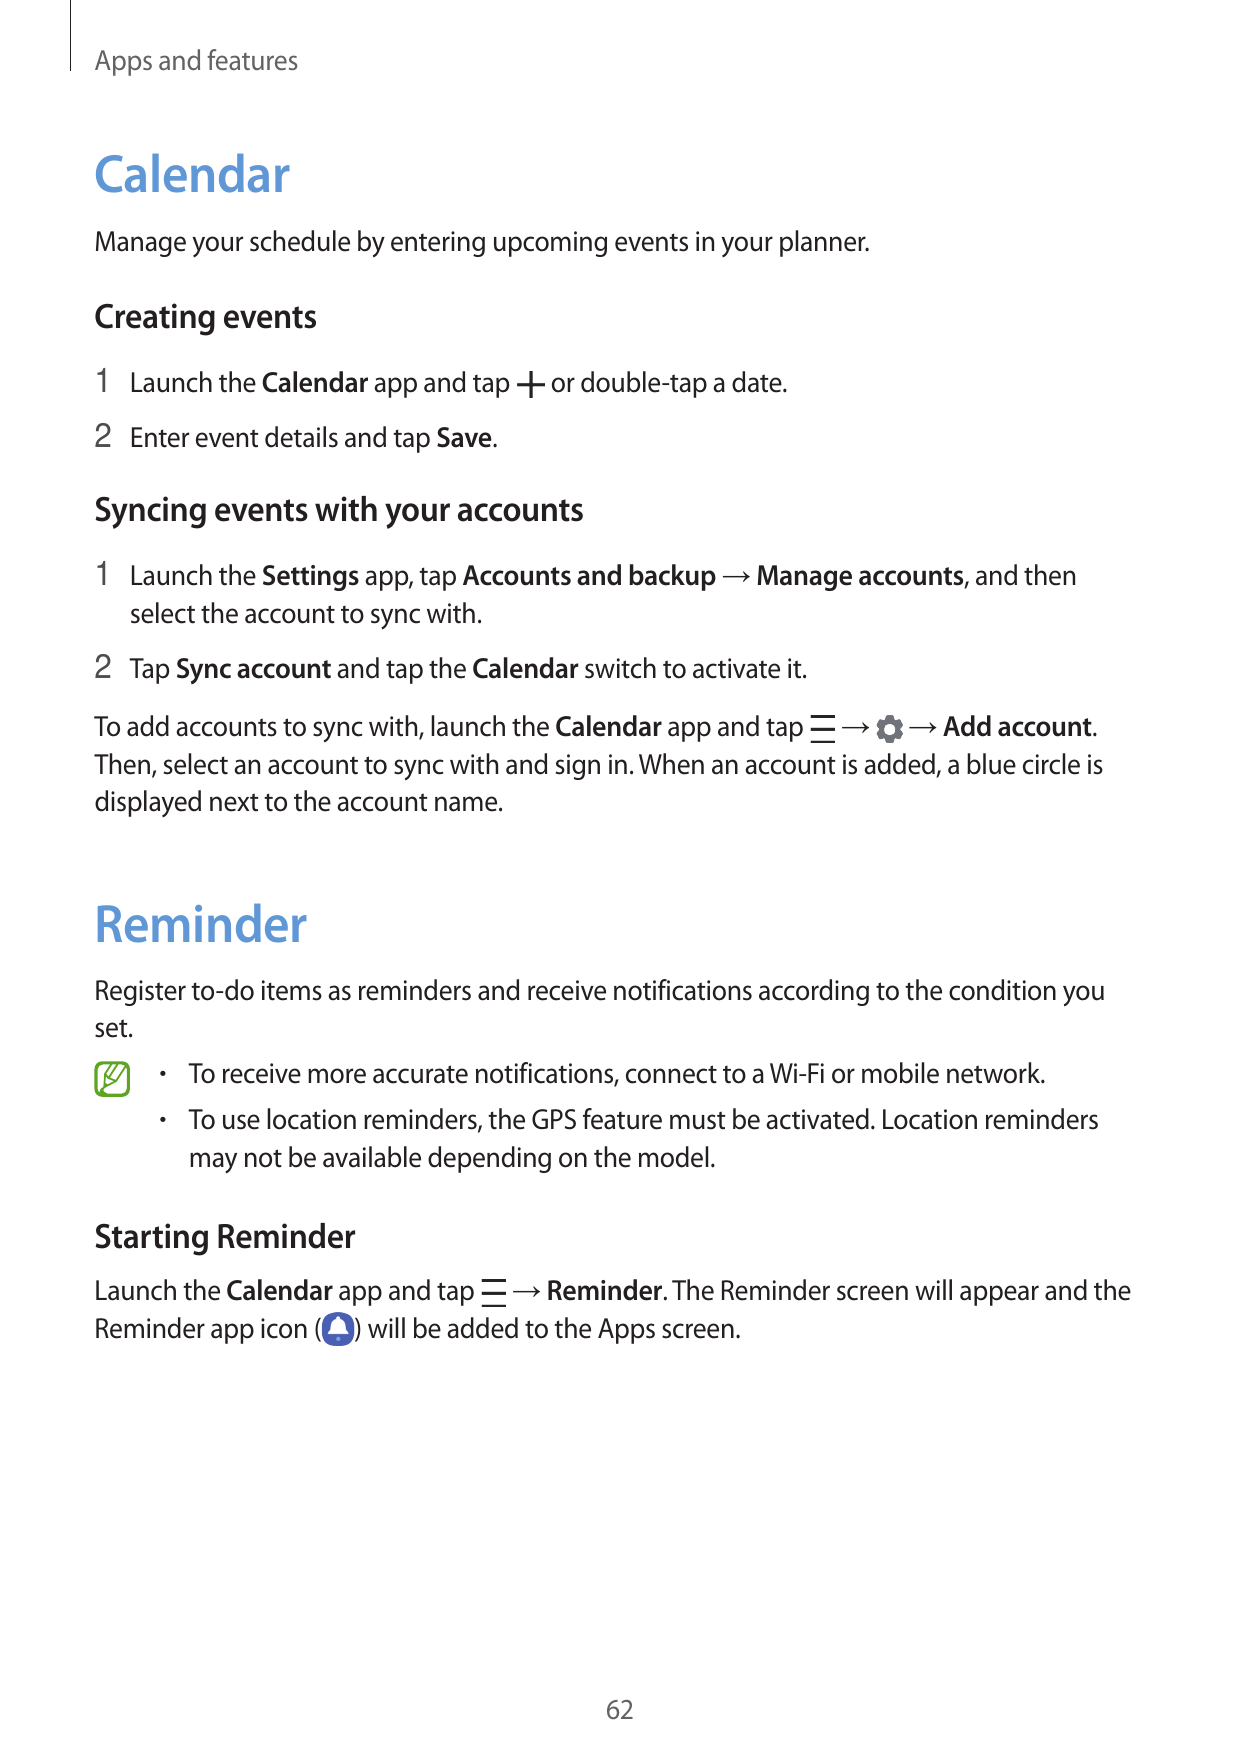 Apps and featuresCalendarManage your schedule by entering upcoming events in your planner.Creating events1 Launch the Calendar a